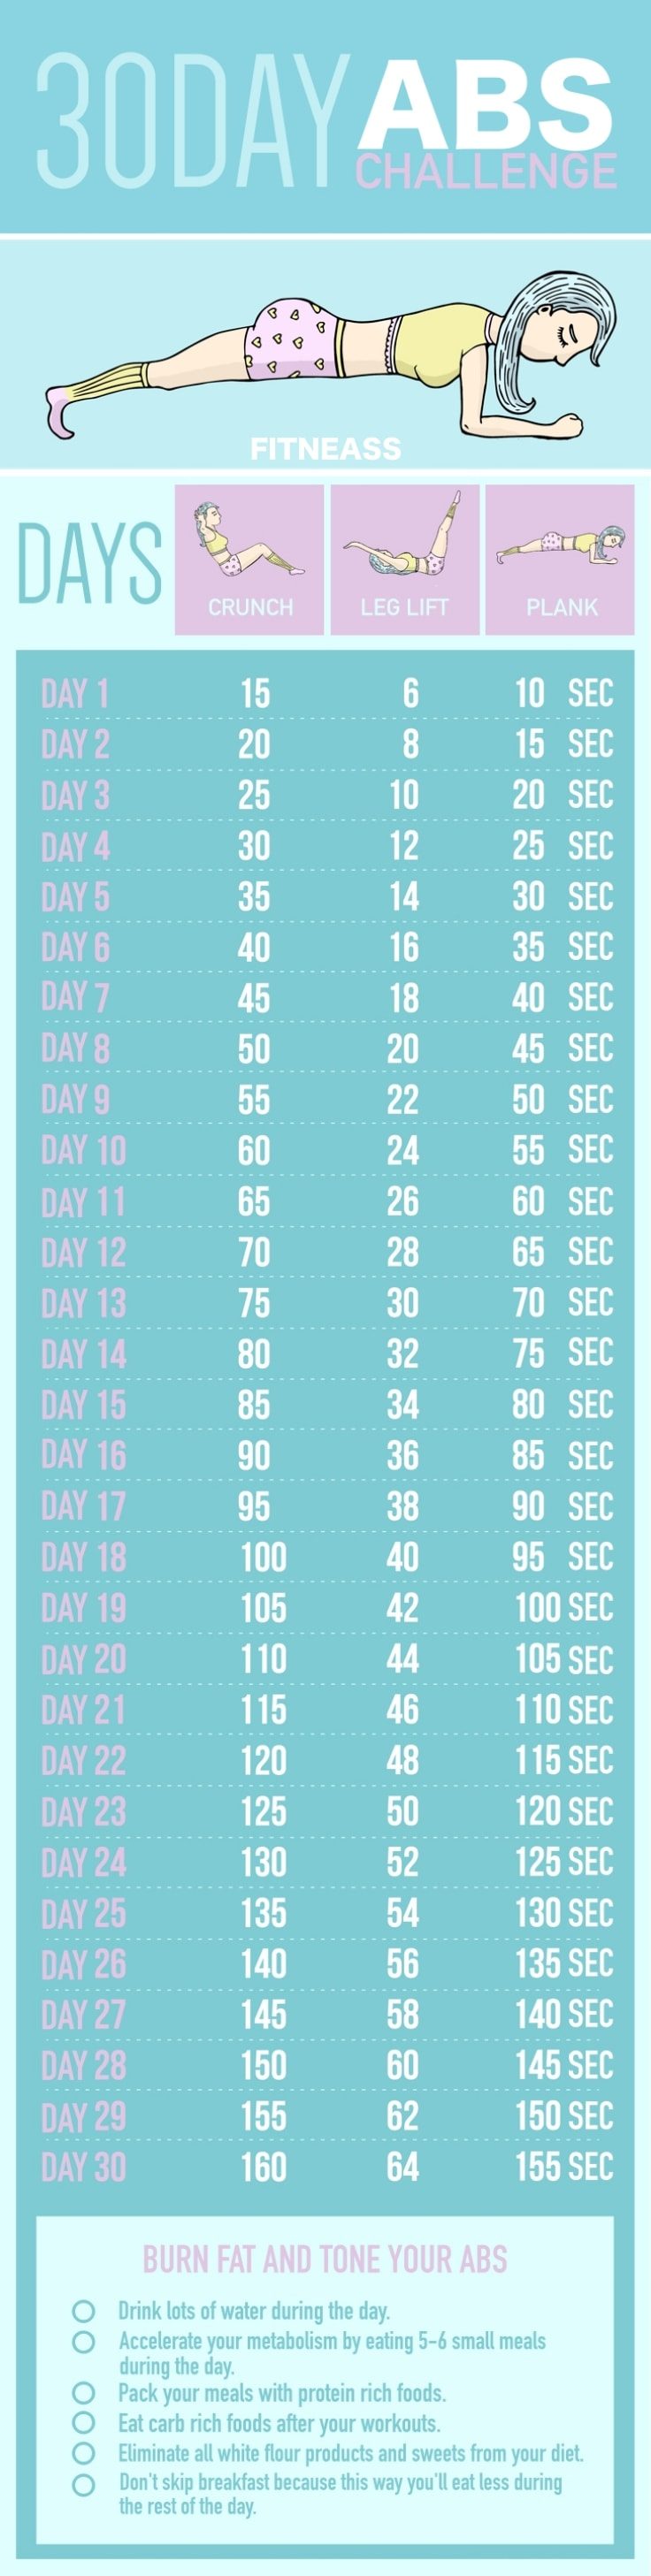 30-Day Abs Challenge by Fitneass